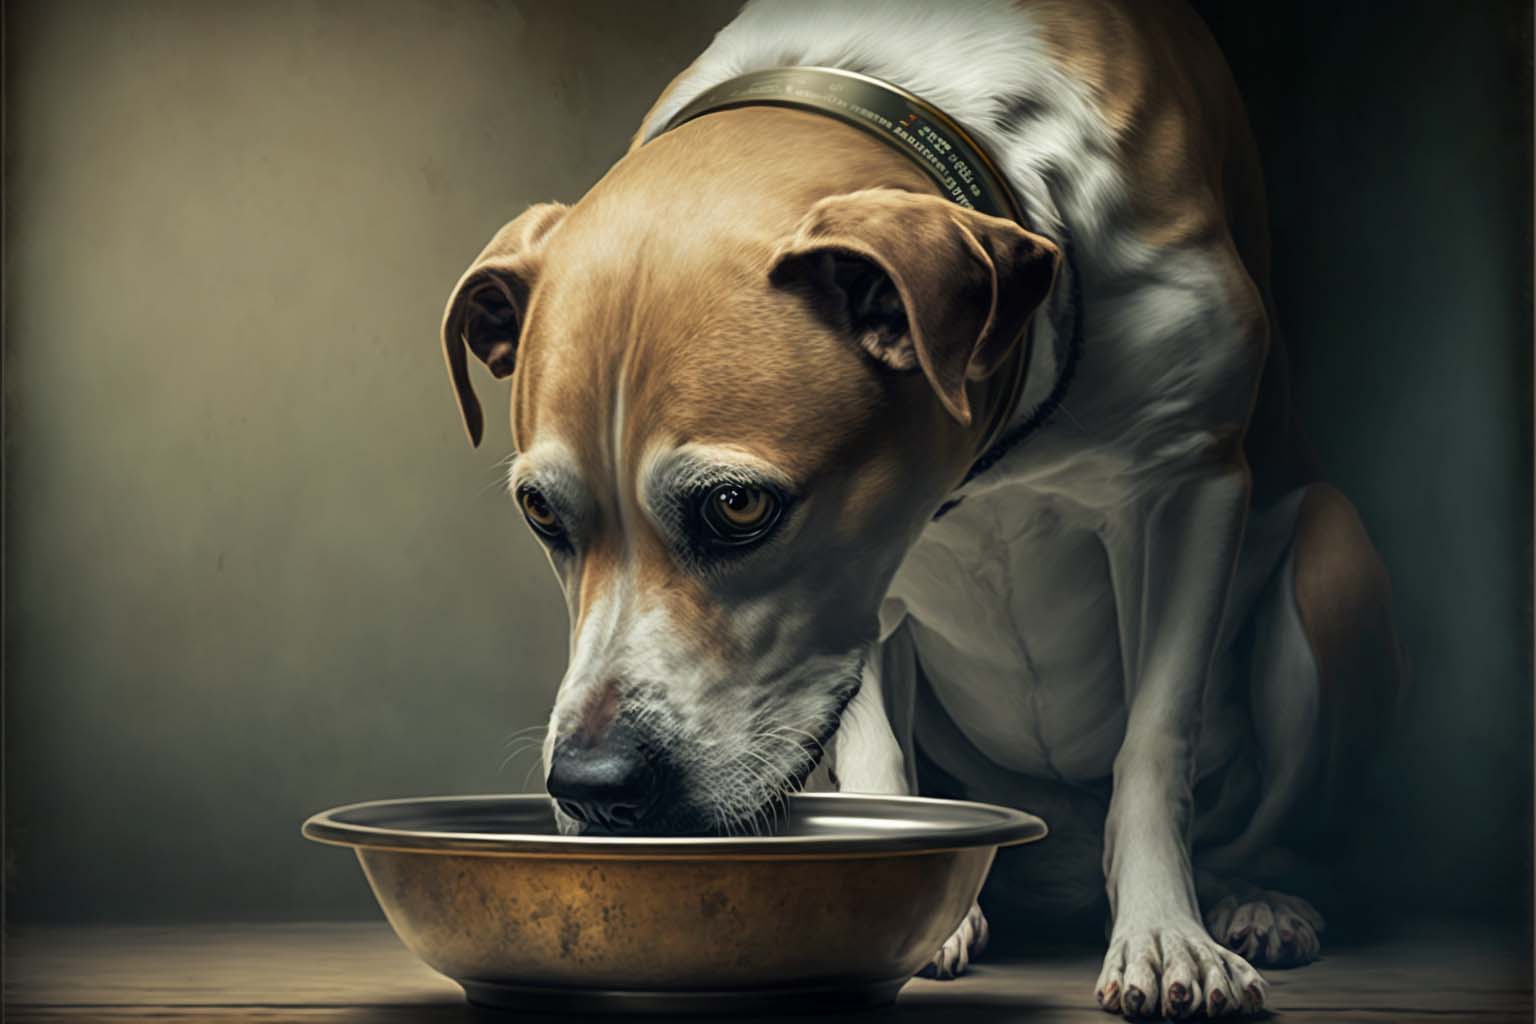 Why Feeding Your Dog Once a Day Creates Problems